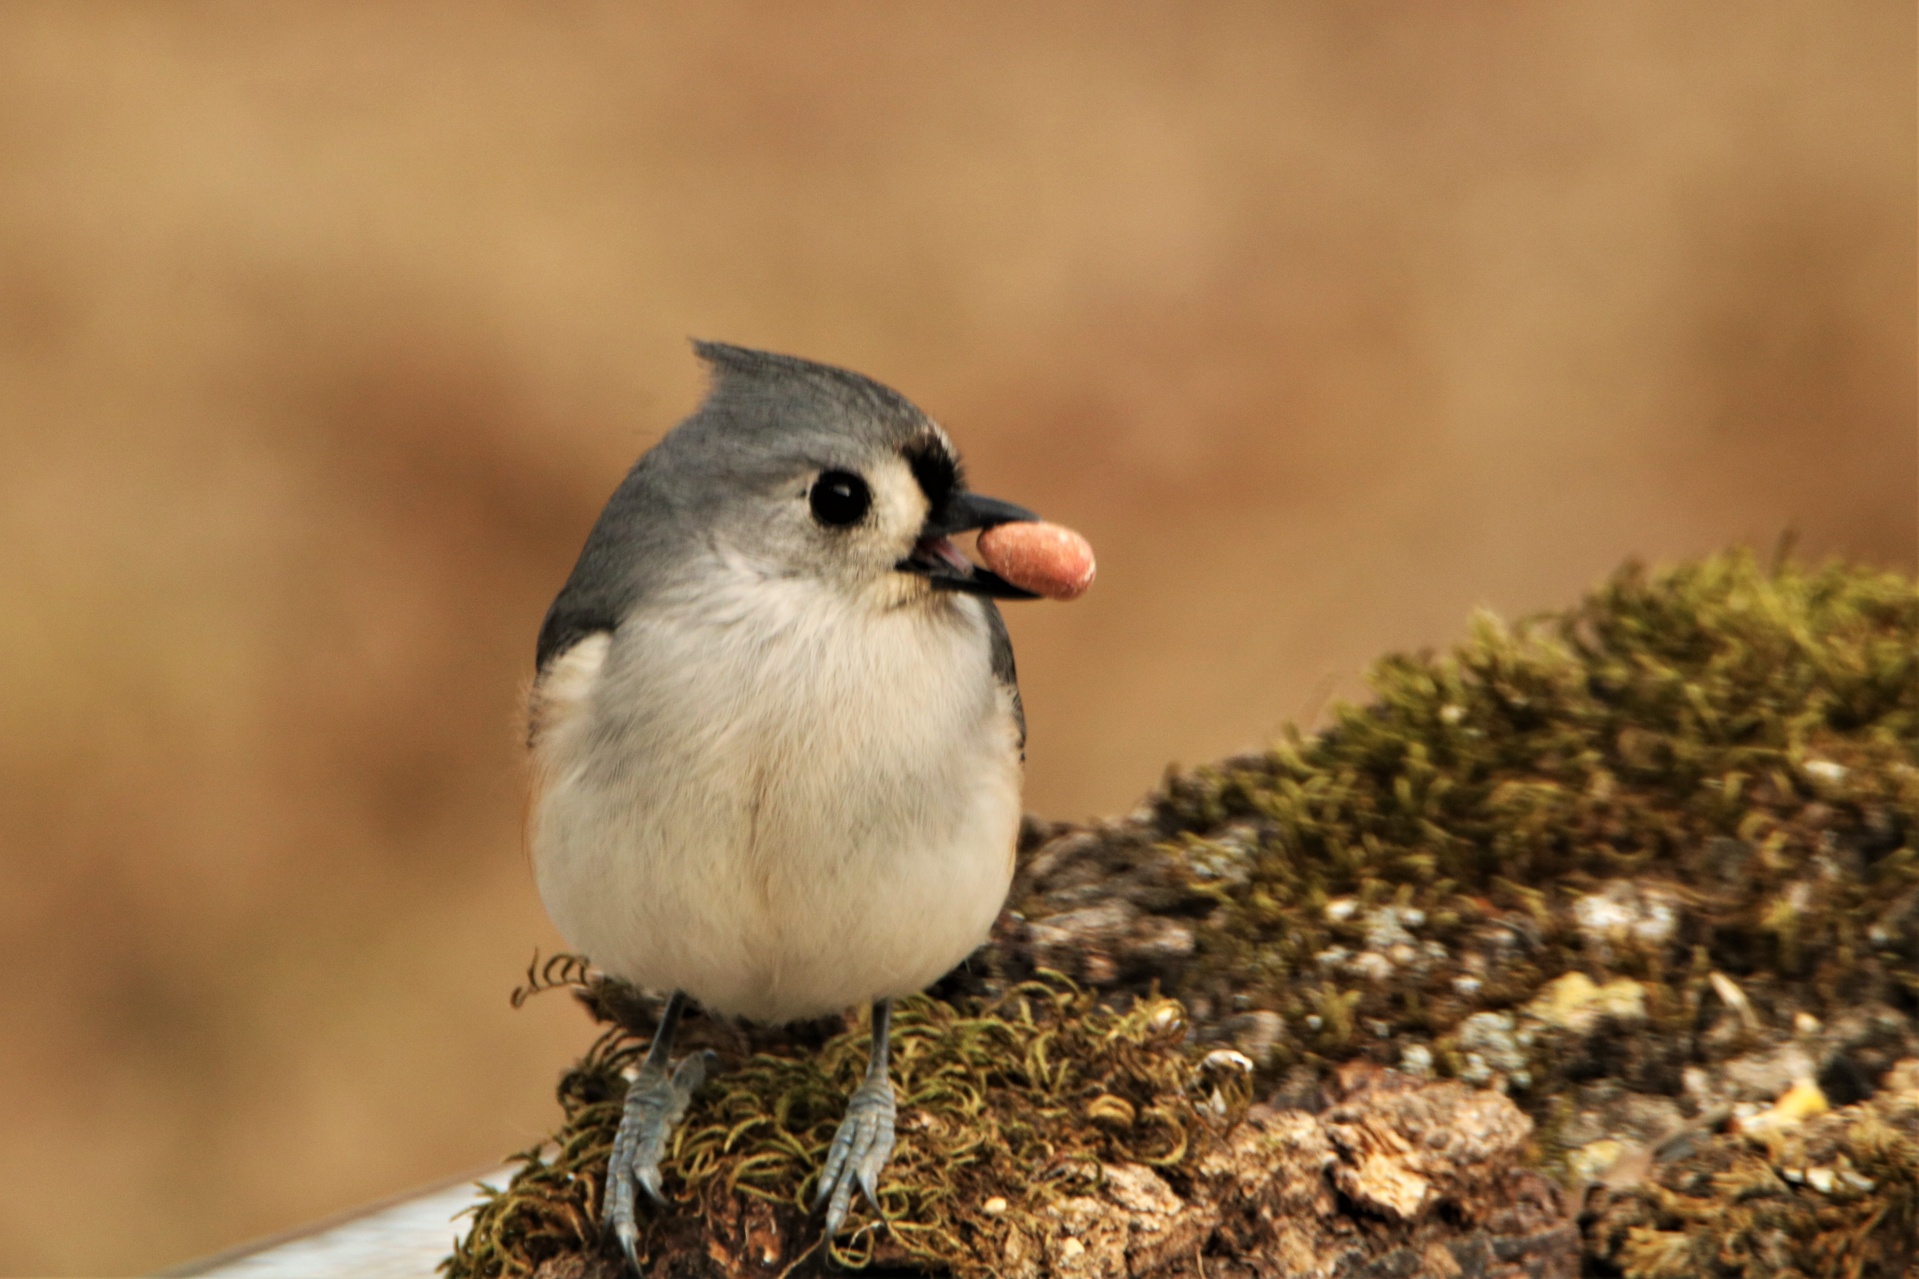 Tufted Titmouse With Peanut